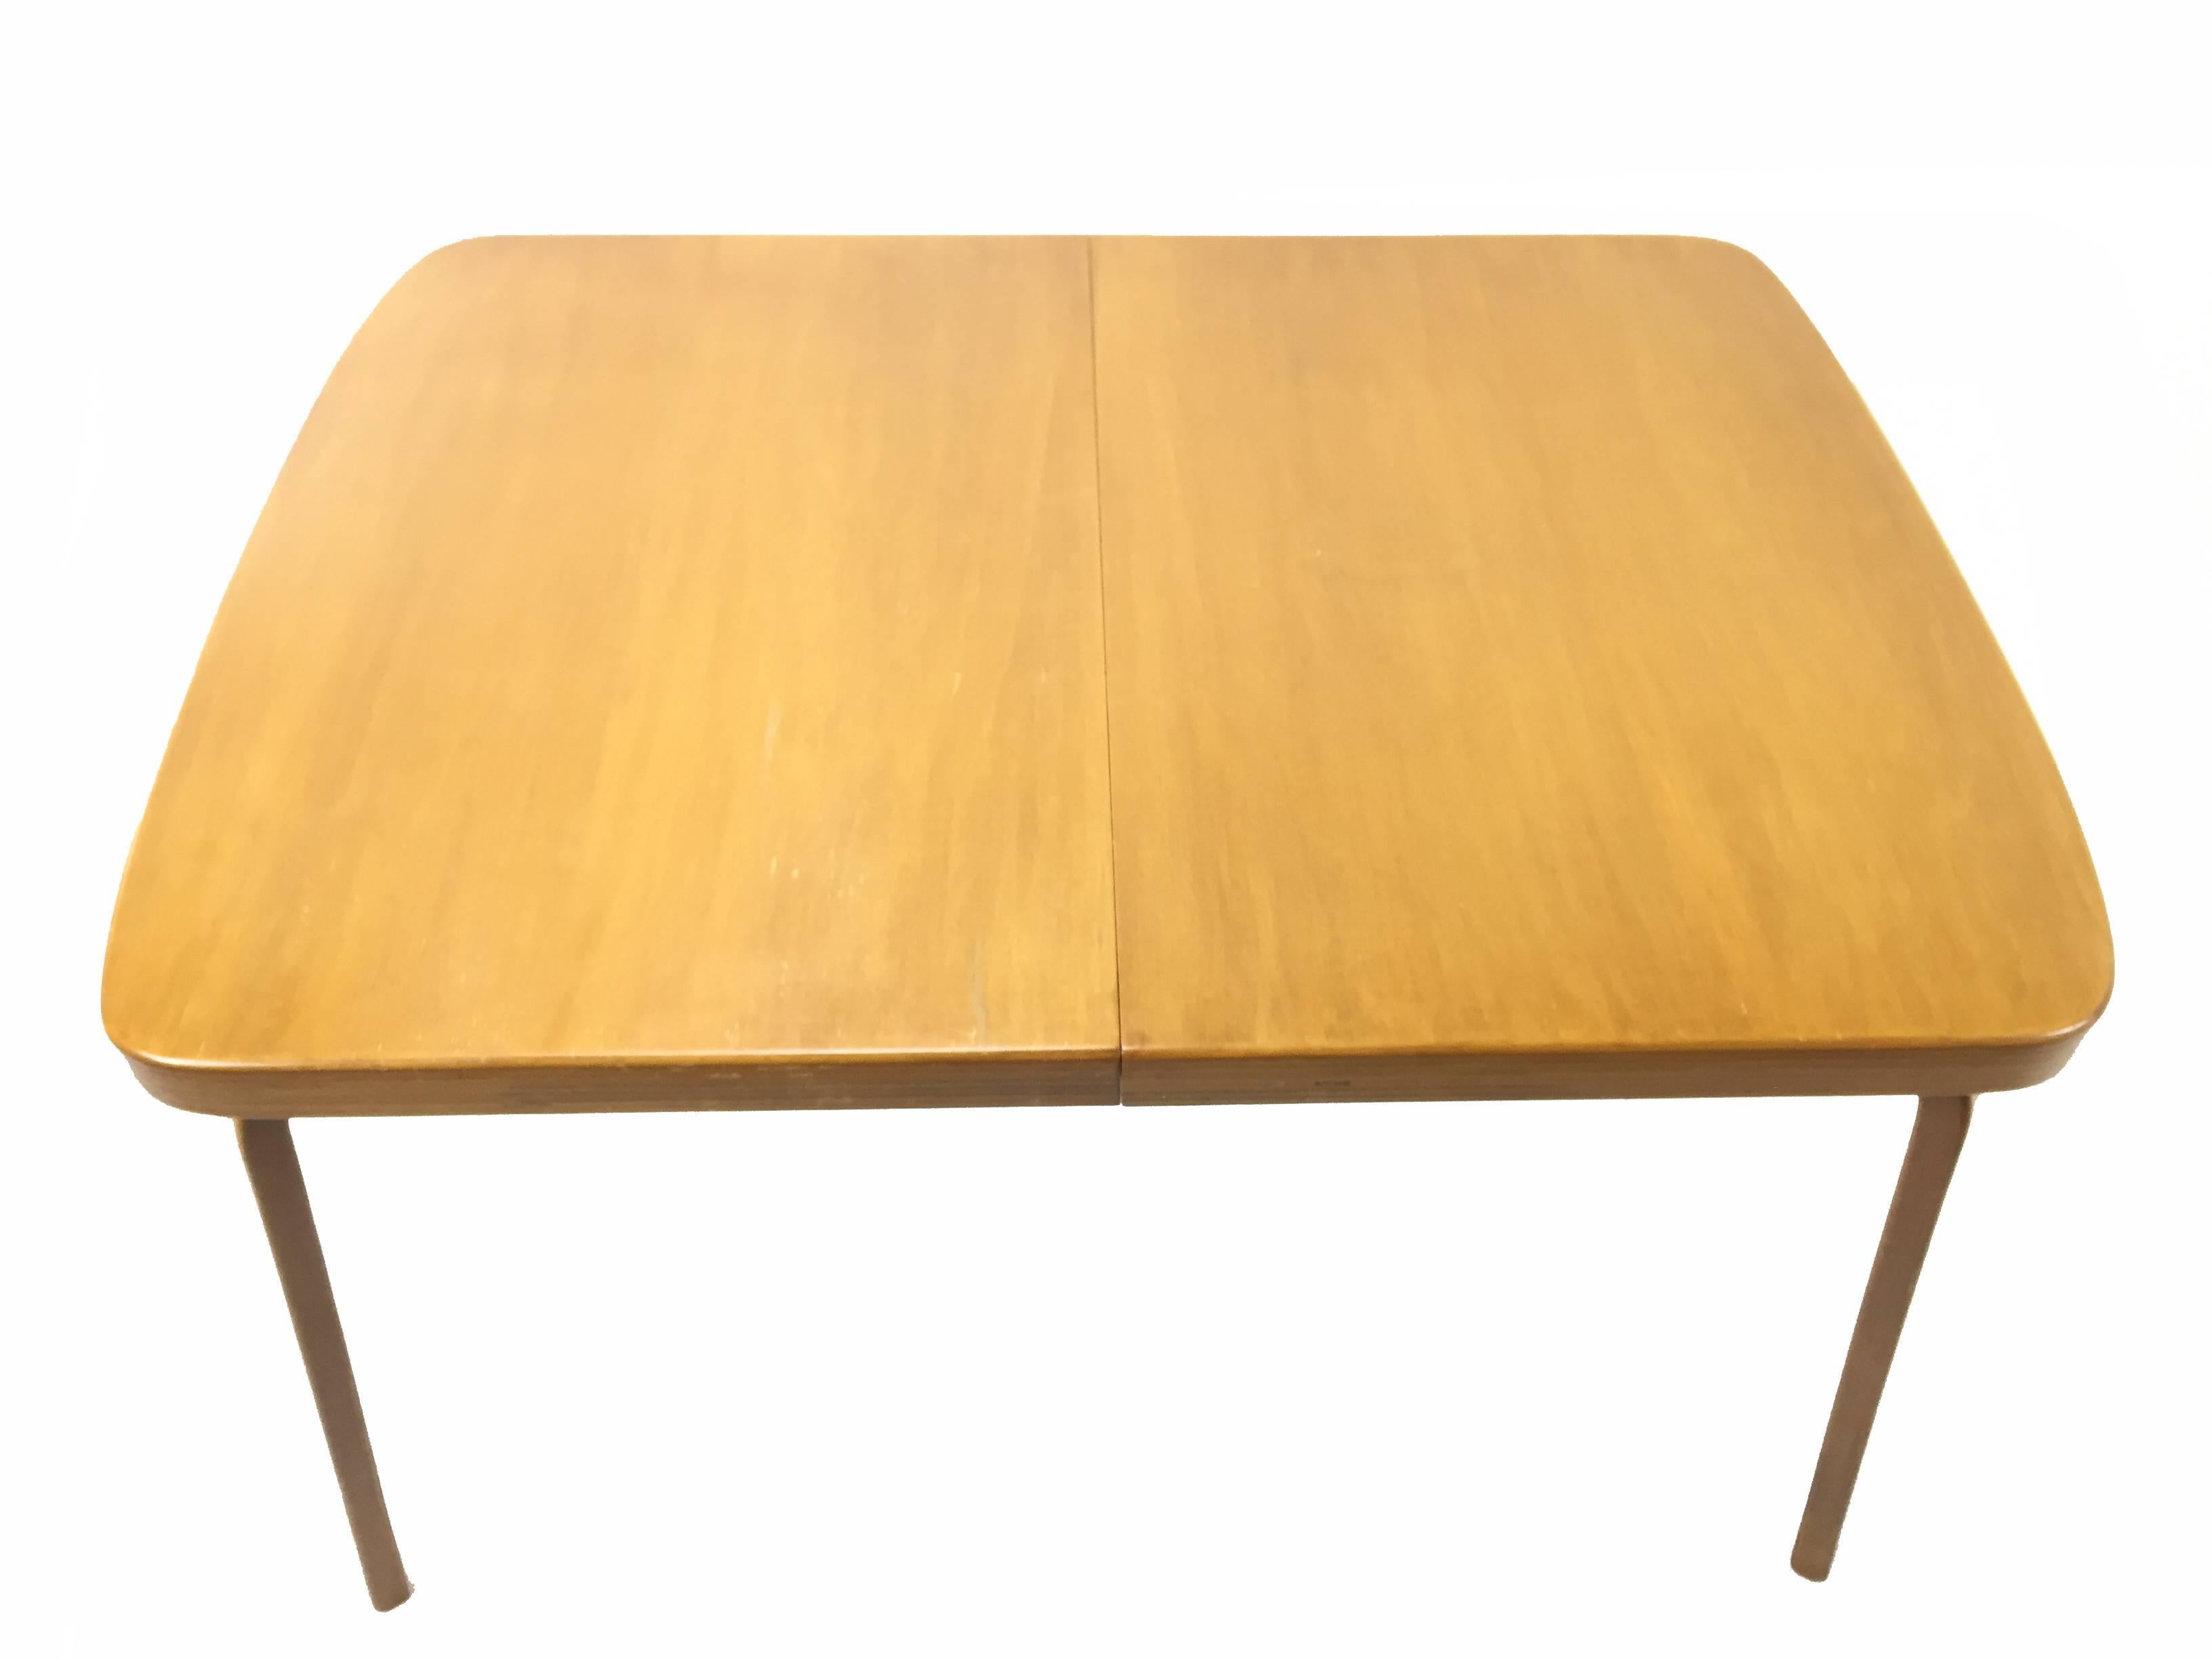 Thaden-Jordan Bent Plywood Dining Table In Fair Condition For Sale In Berkeley, CA